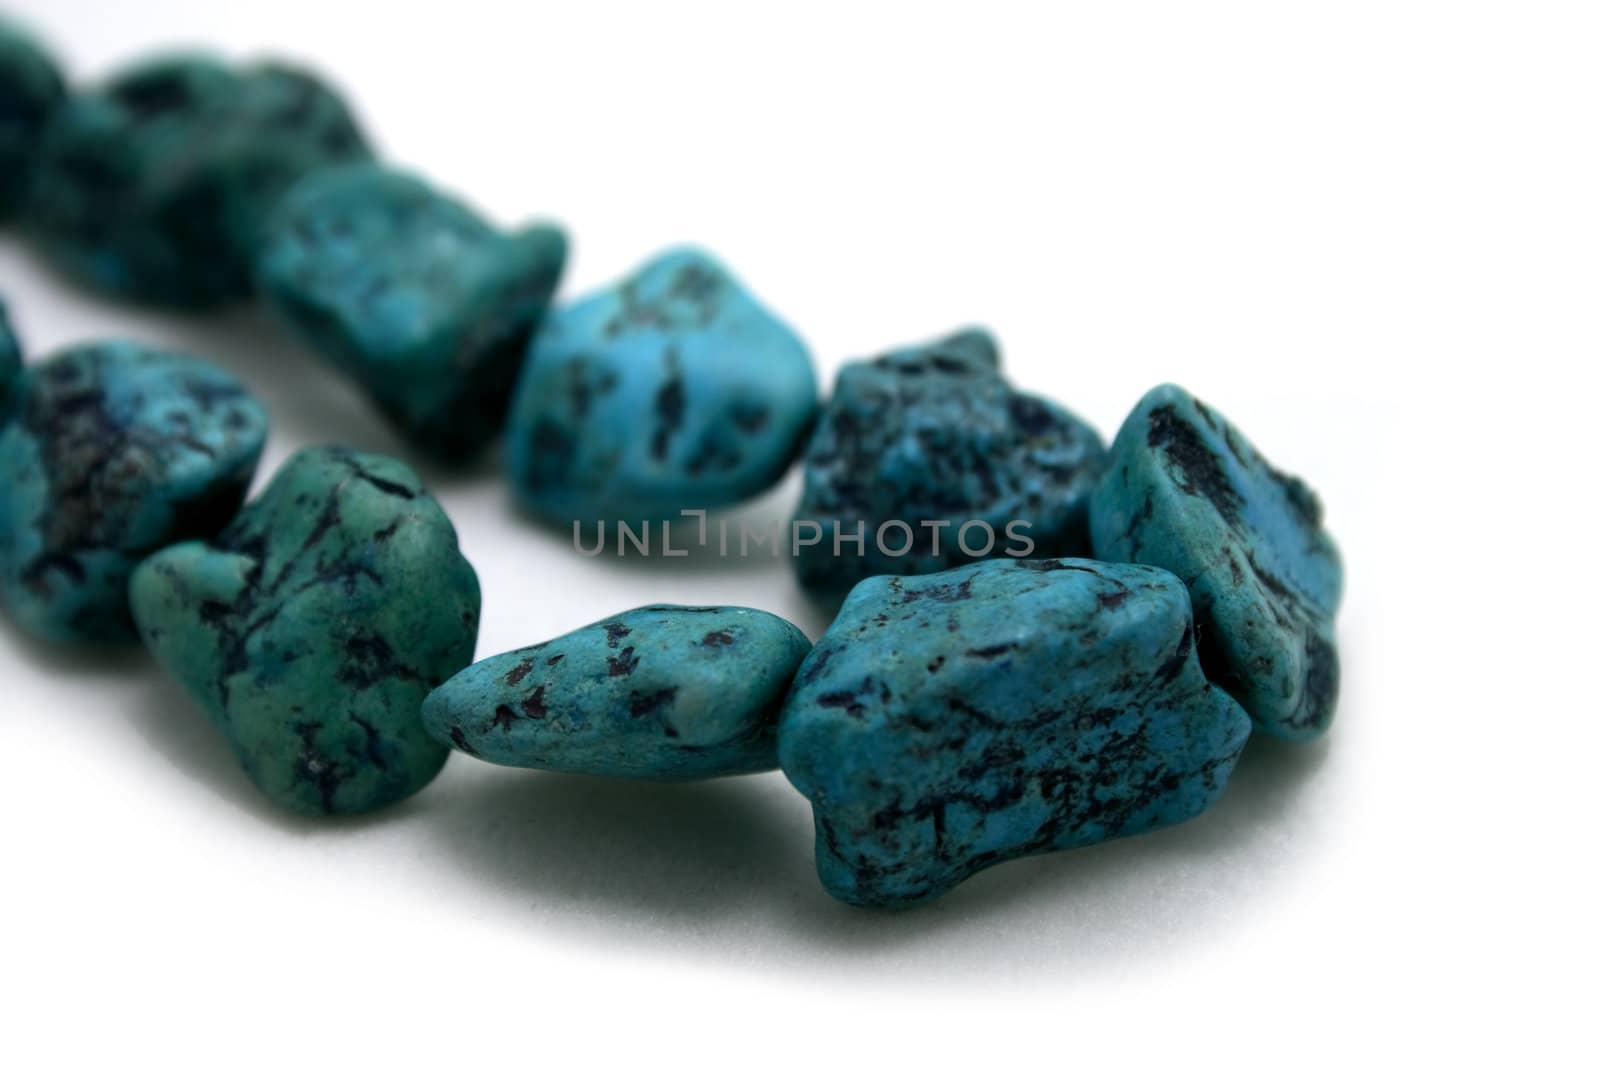 Turquoise stones by BengLim